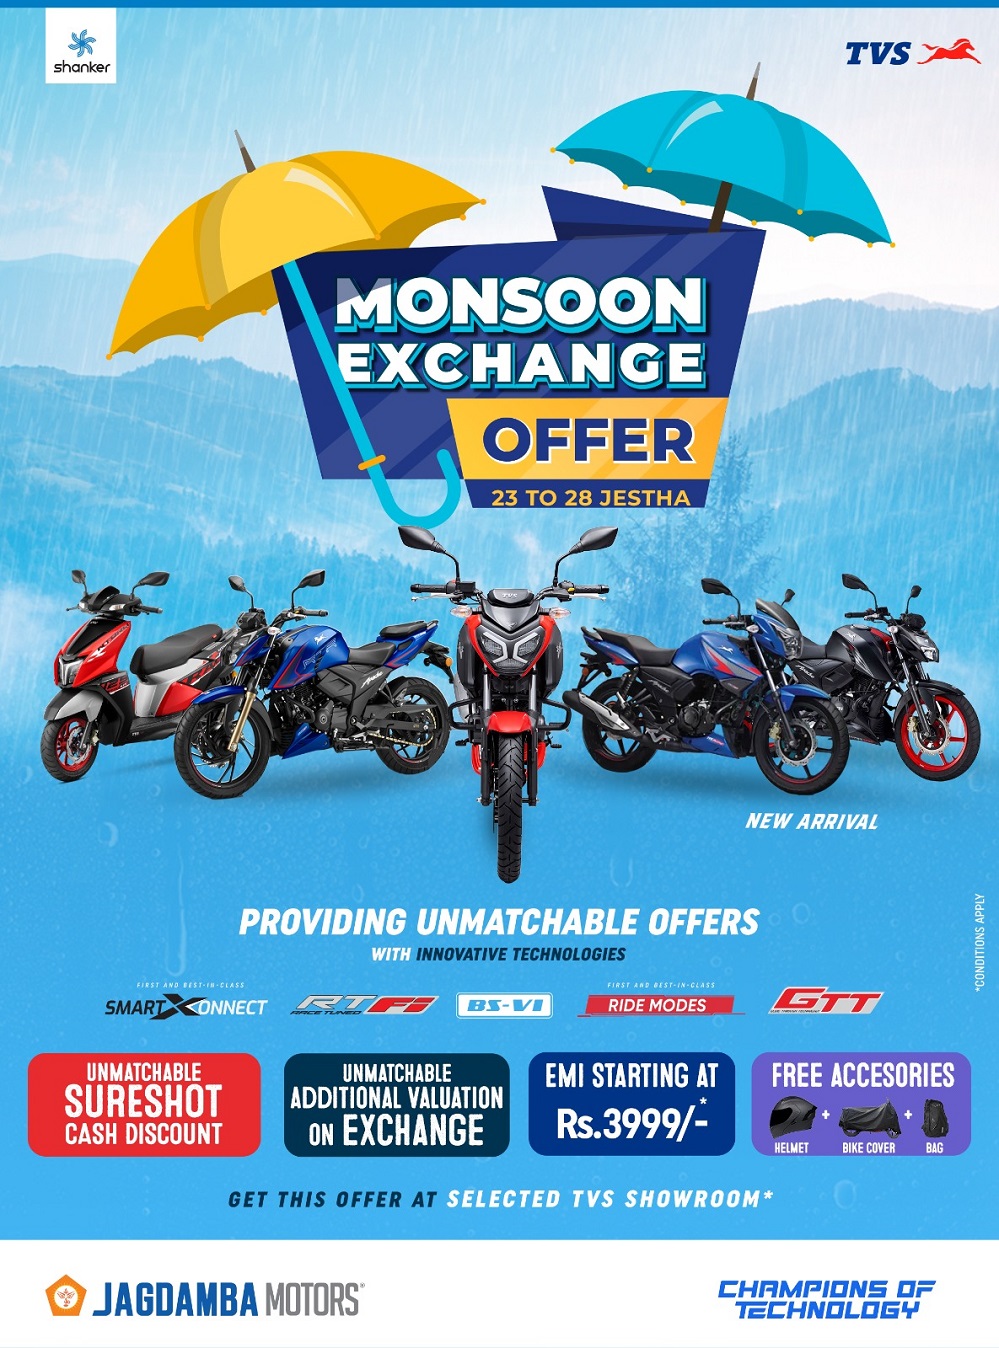 Jagdamba Motors Launches ‘Monsoon Exchange’ with Unmatchable Offers on TVS Motorcycles